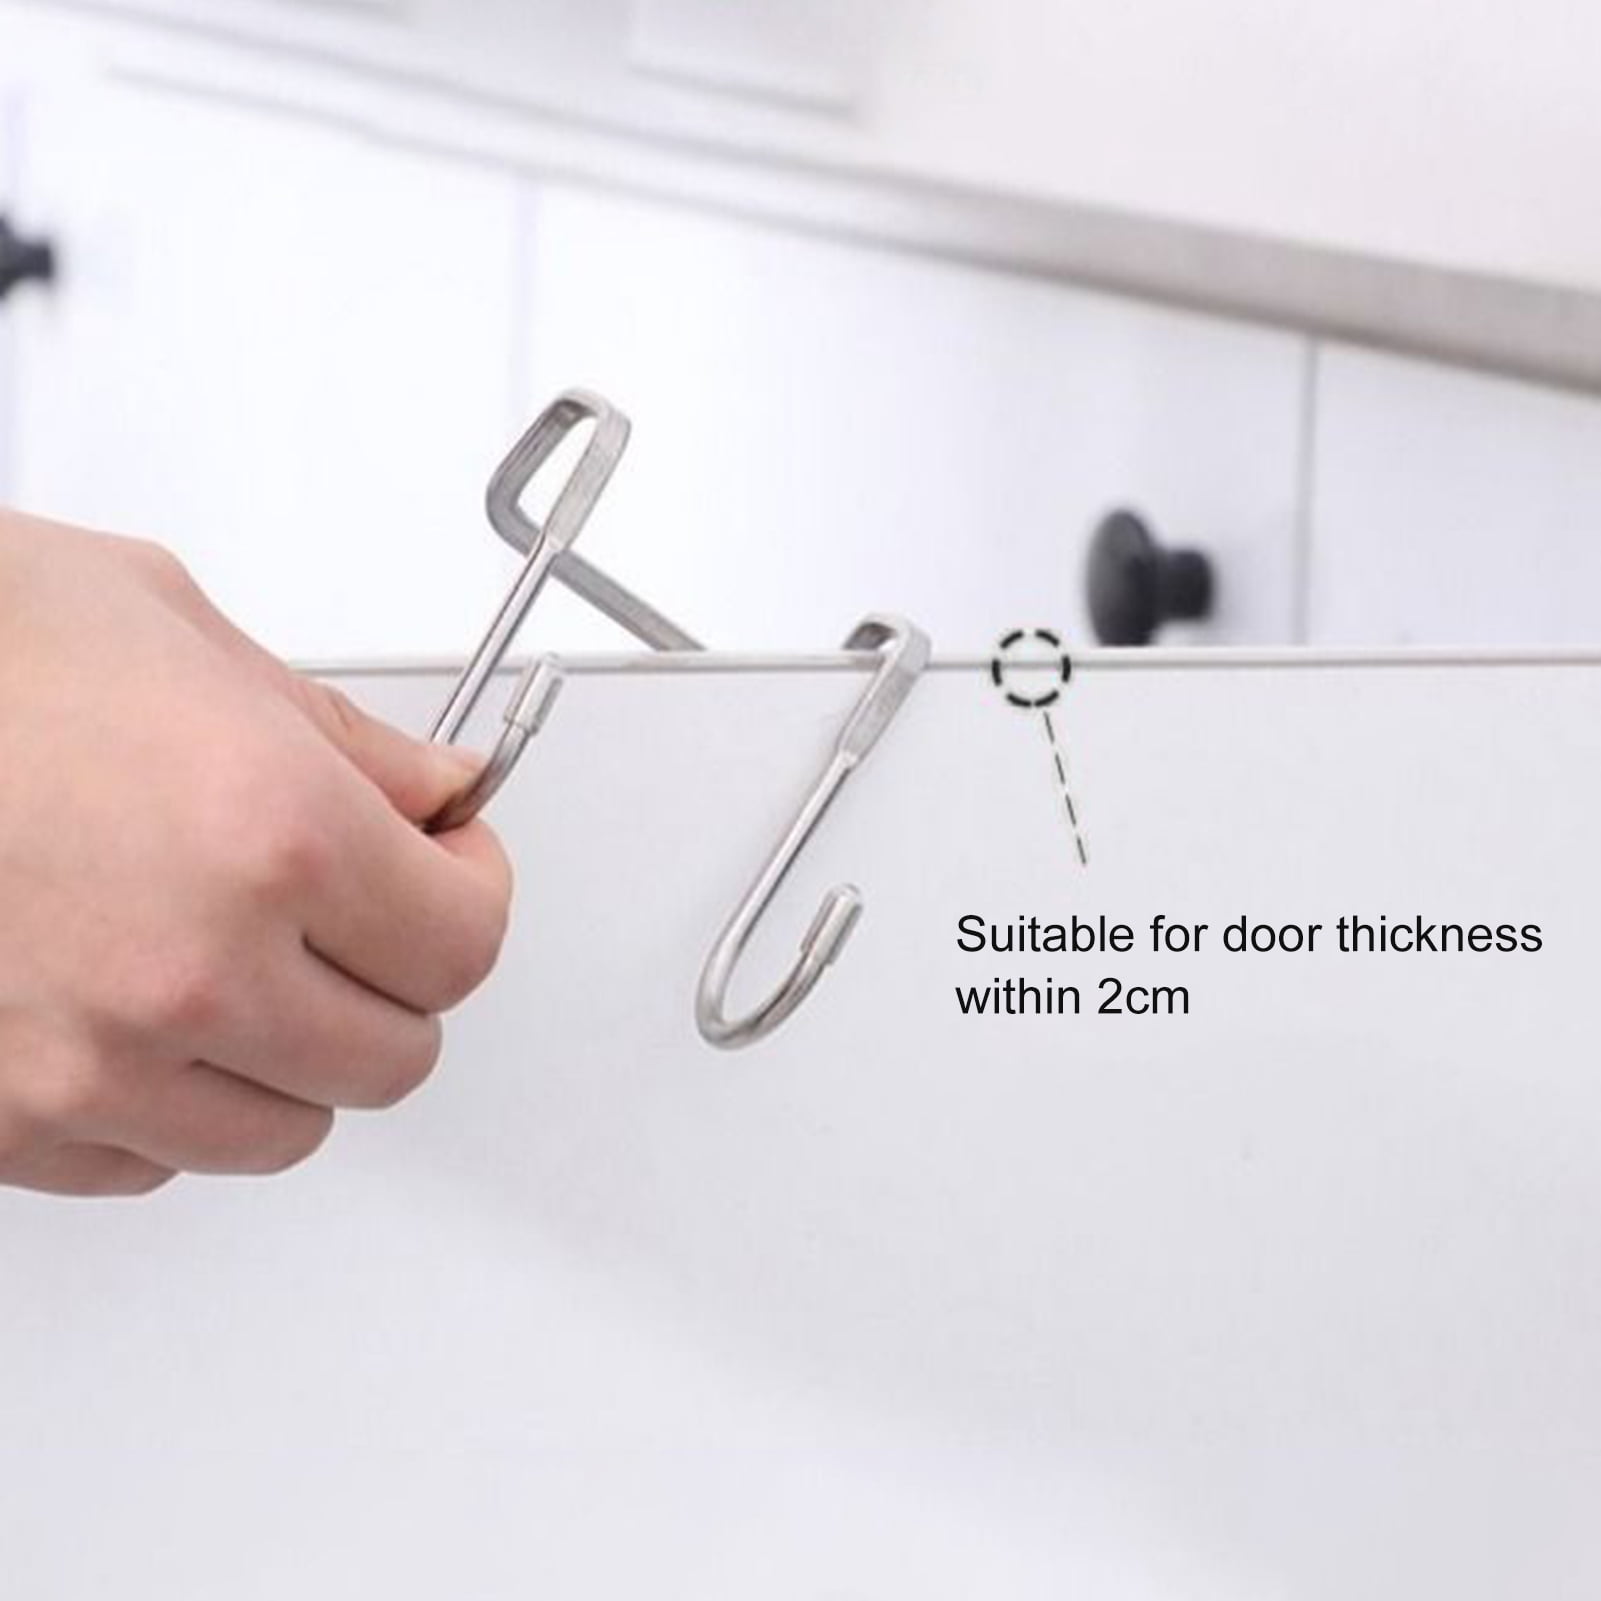 Over The Door Door Hanger Free Punching No Trace Stainless Steel Clothes Rack for Home Black